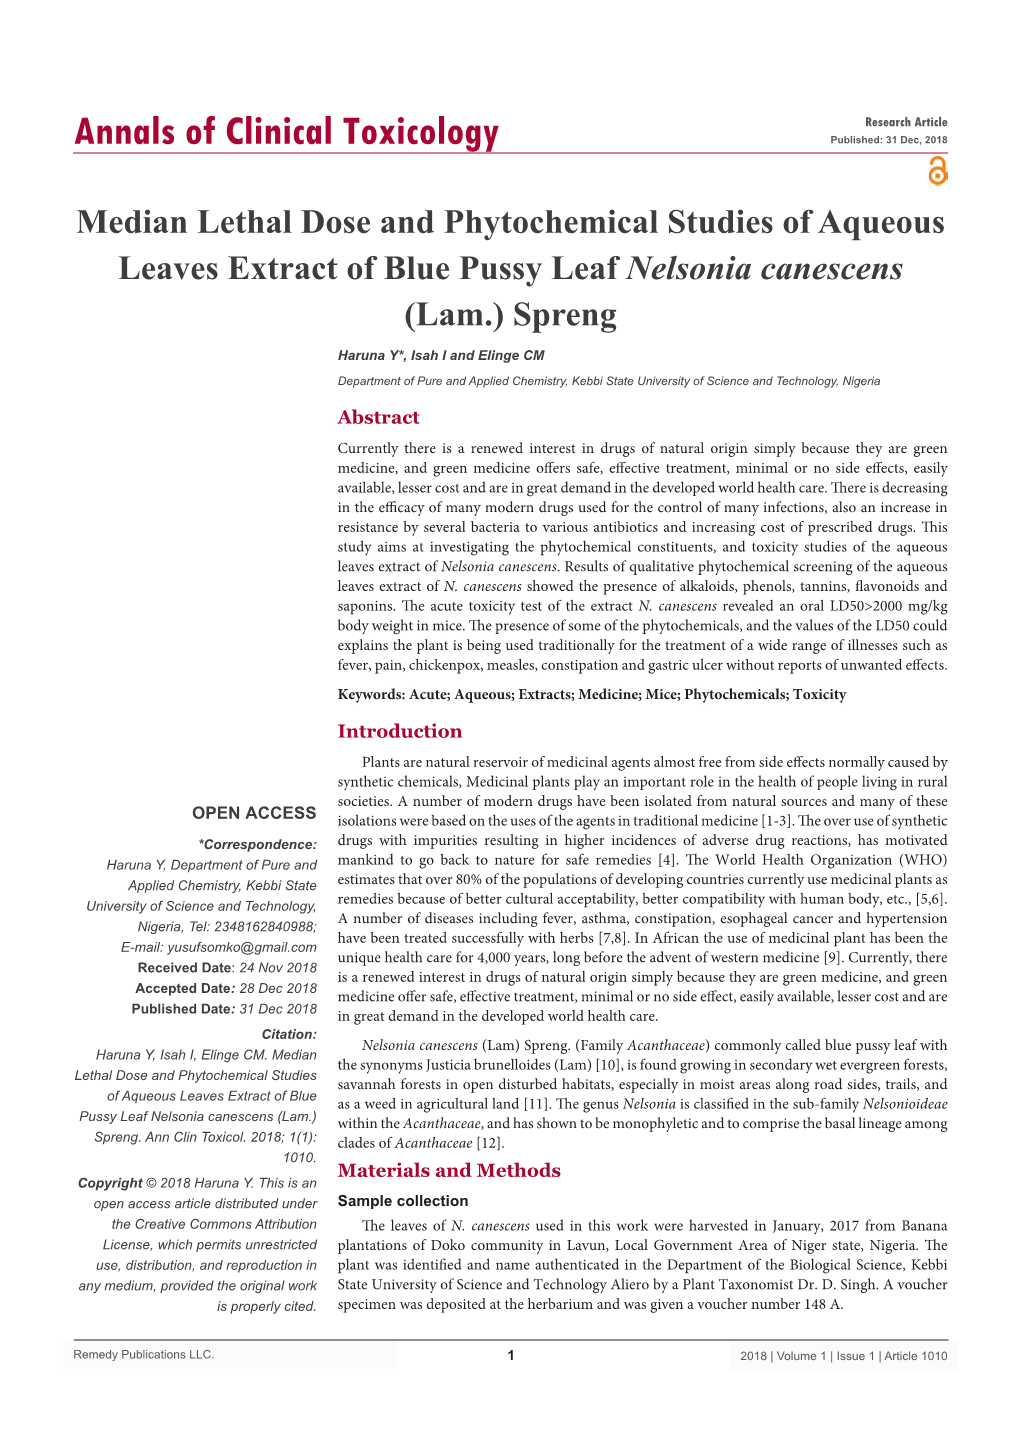 Median Lethal Dose and Phytochemical Studies of Aqueous Leaves Extract of Blue Pussy Leaf Nelsonia Canescens (Lam.) Spreng